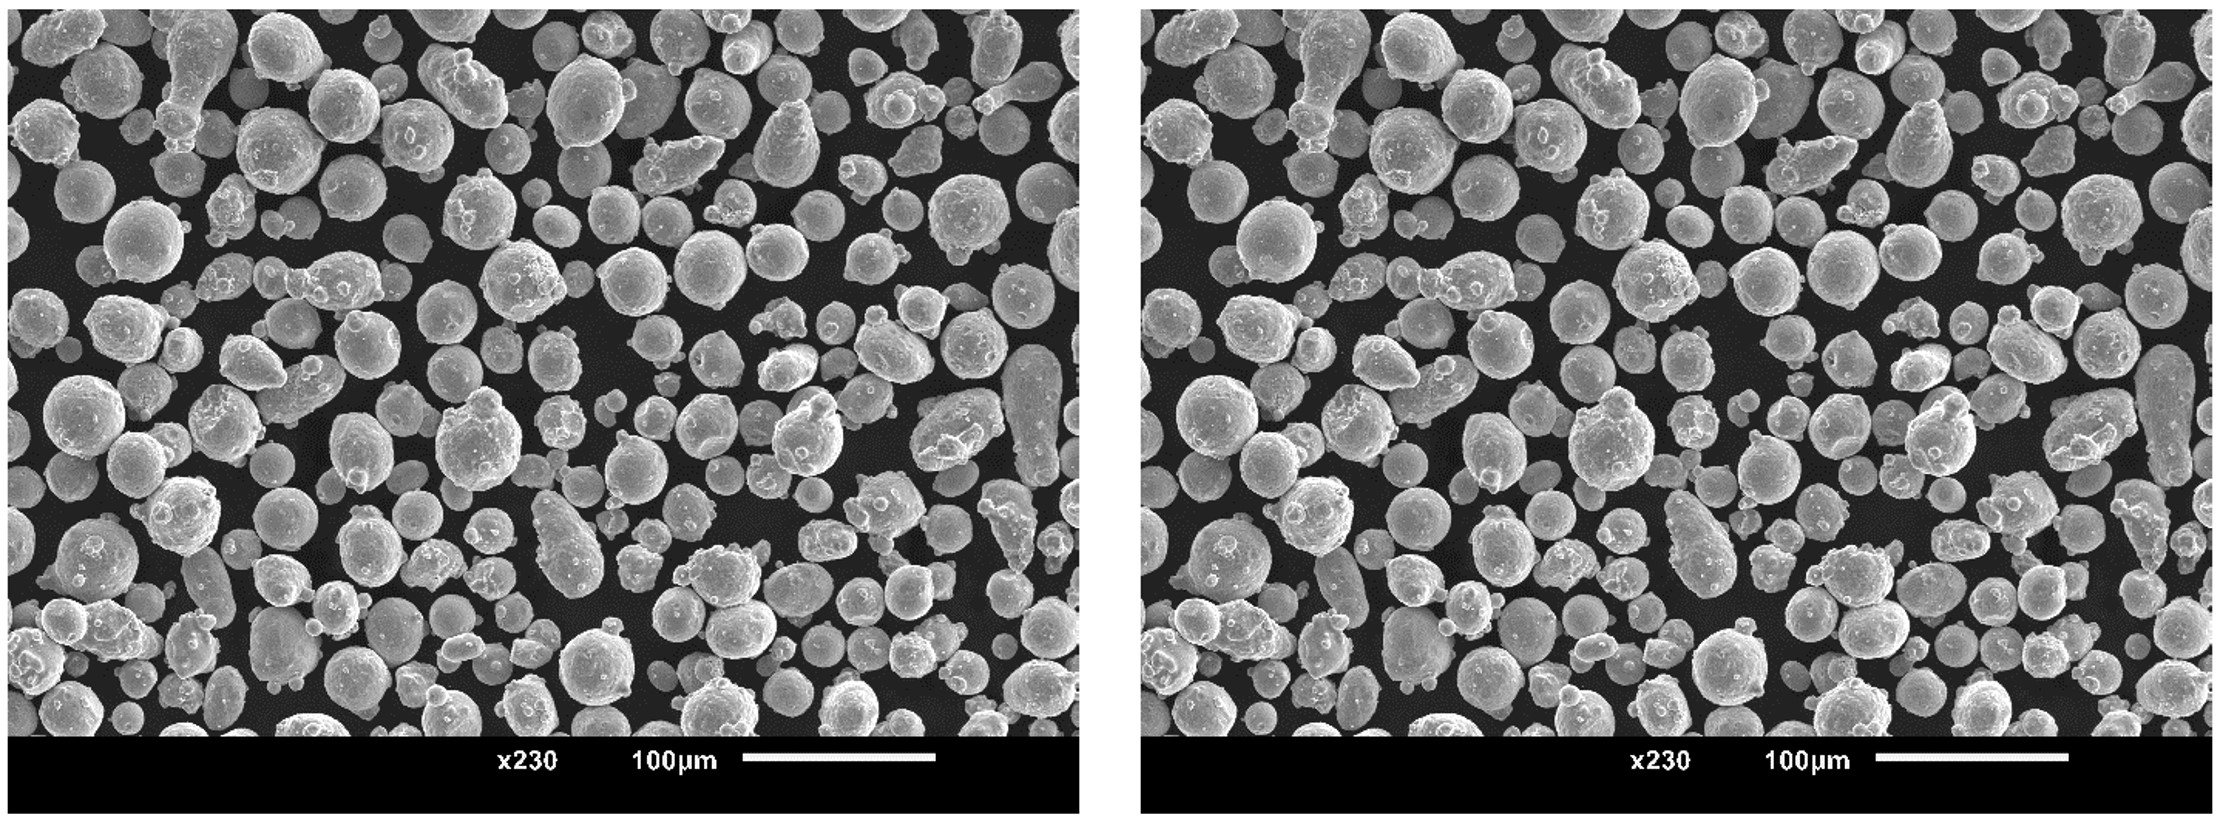 SEM micrographs of spherical 316L powder’s particles, produced by gas atomization